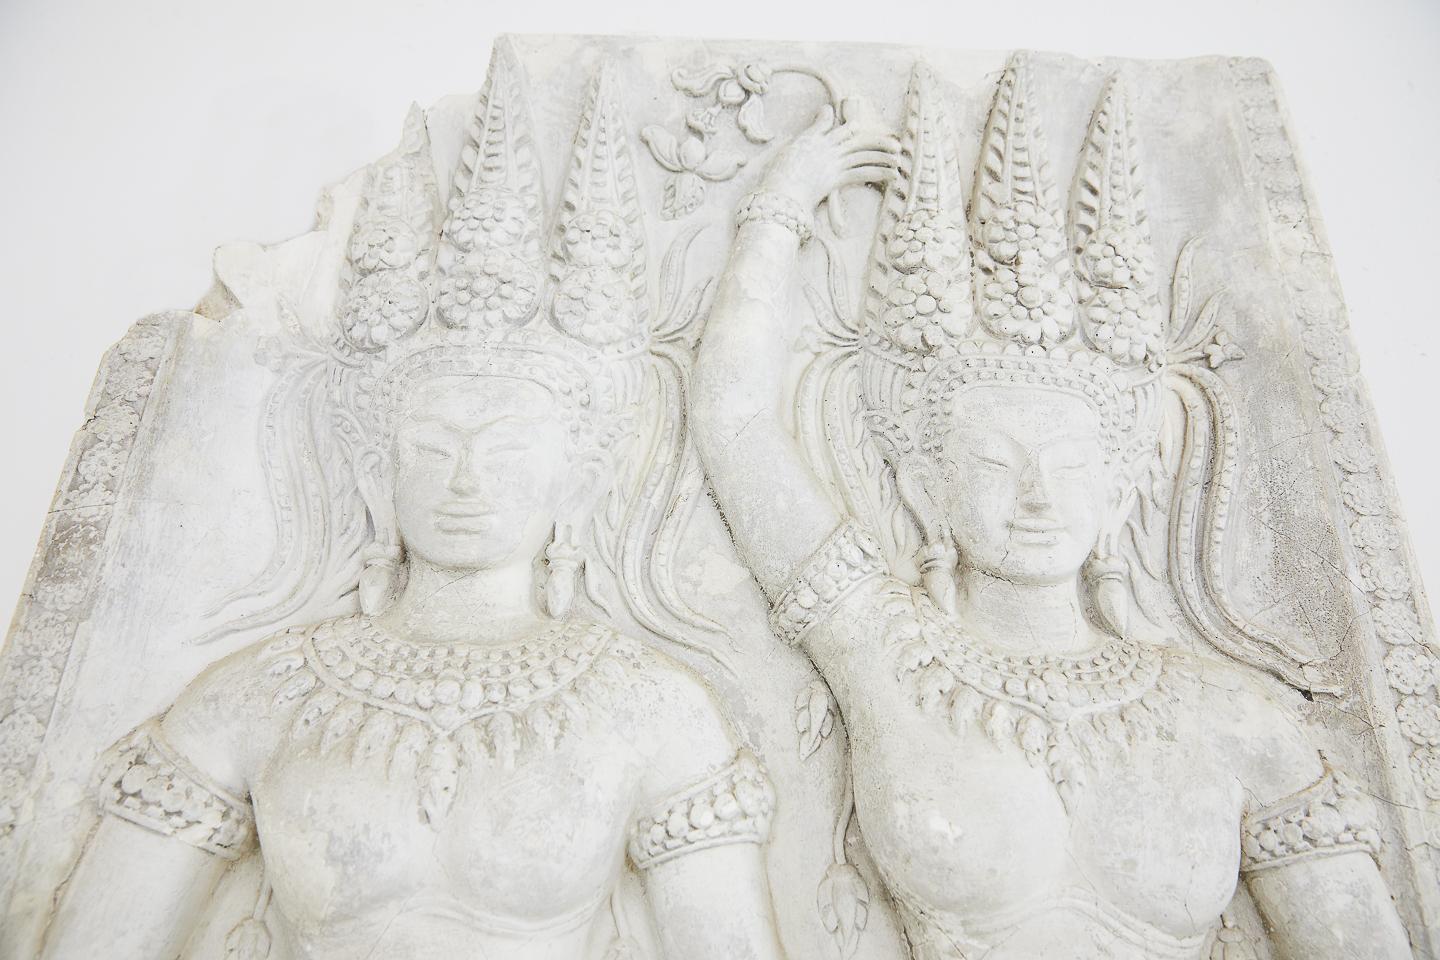 A plaster cast panel museum copy of a temple carving from Angkor Wat Cambodia, depicting Apsara dancing girls. European copy circa 1900.